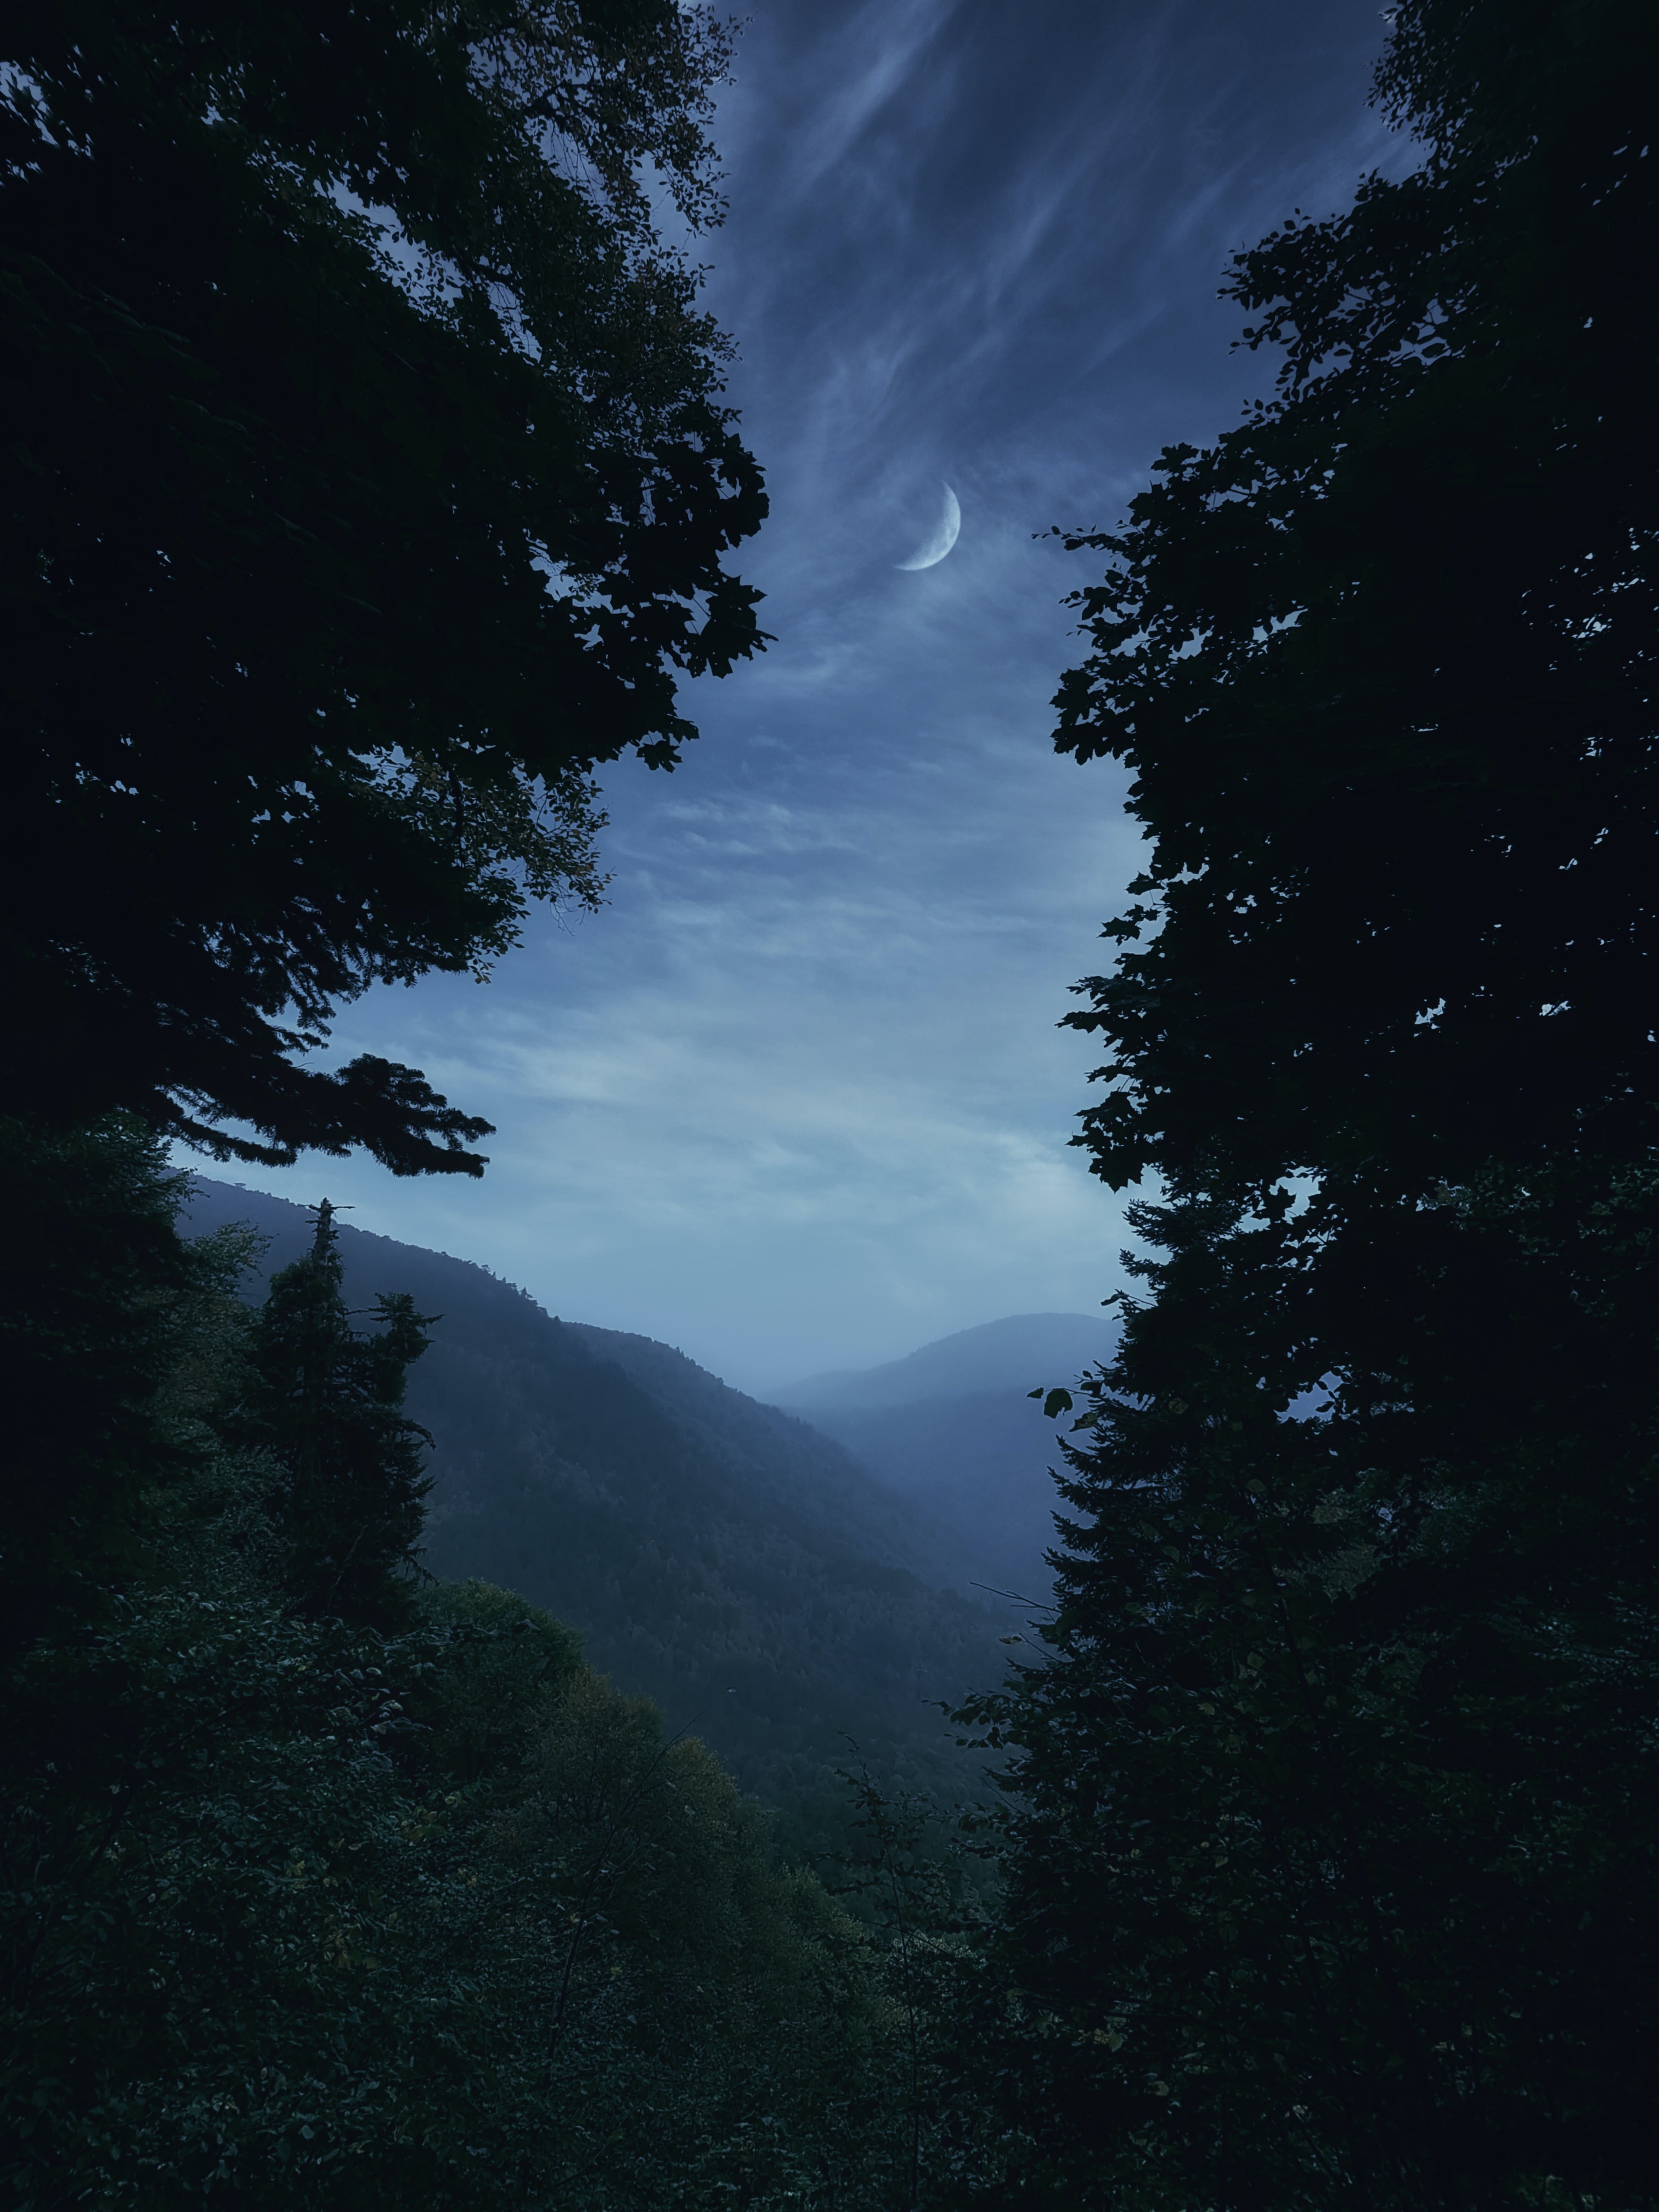 moon, fog, landscape, trees, nature, mountains, twilight, dusk cell phone wallpapers